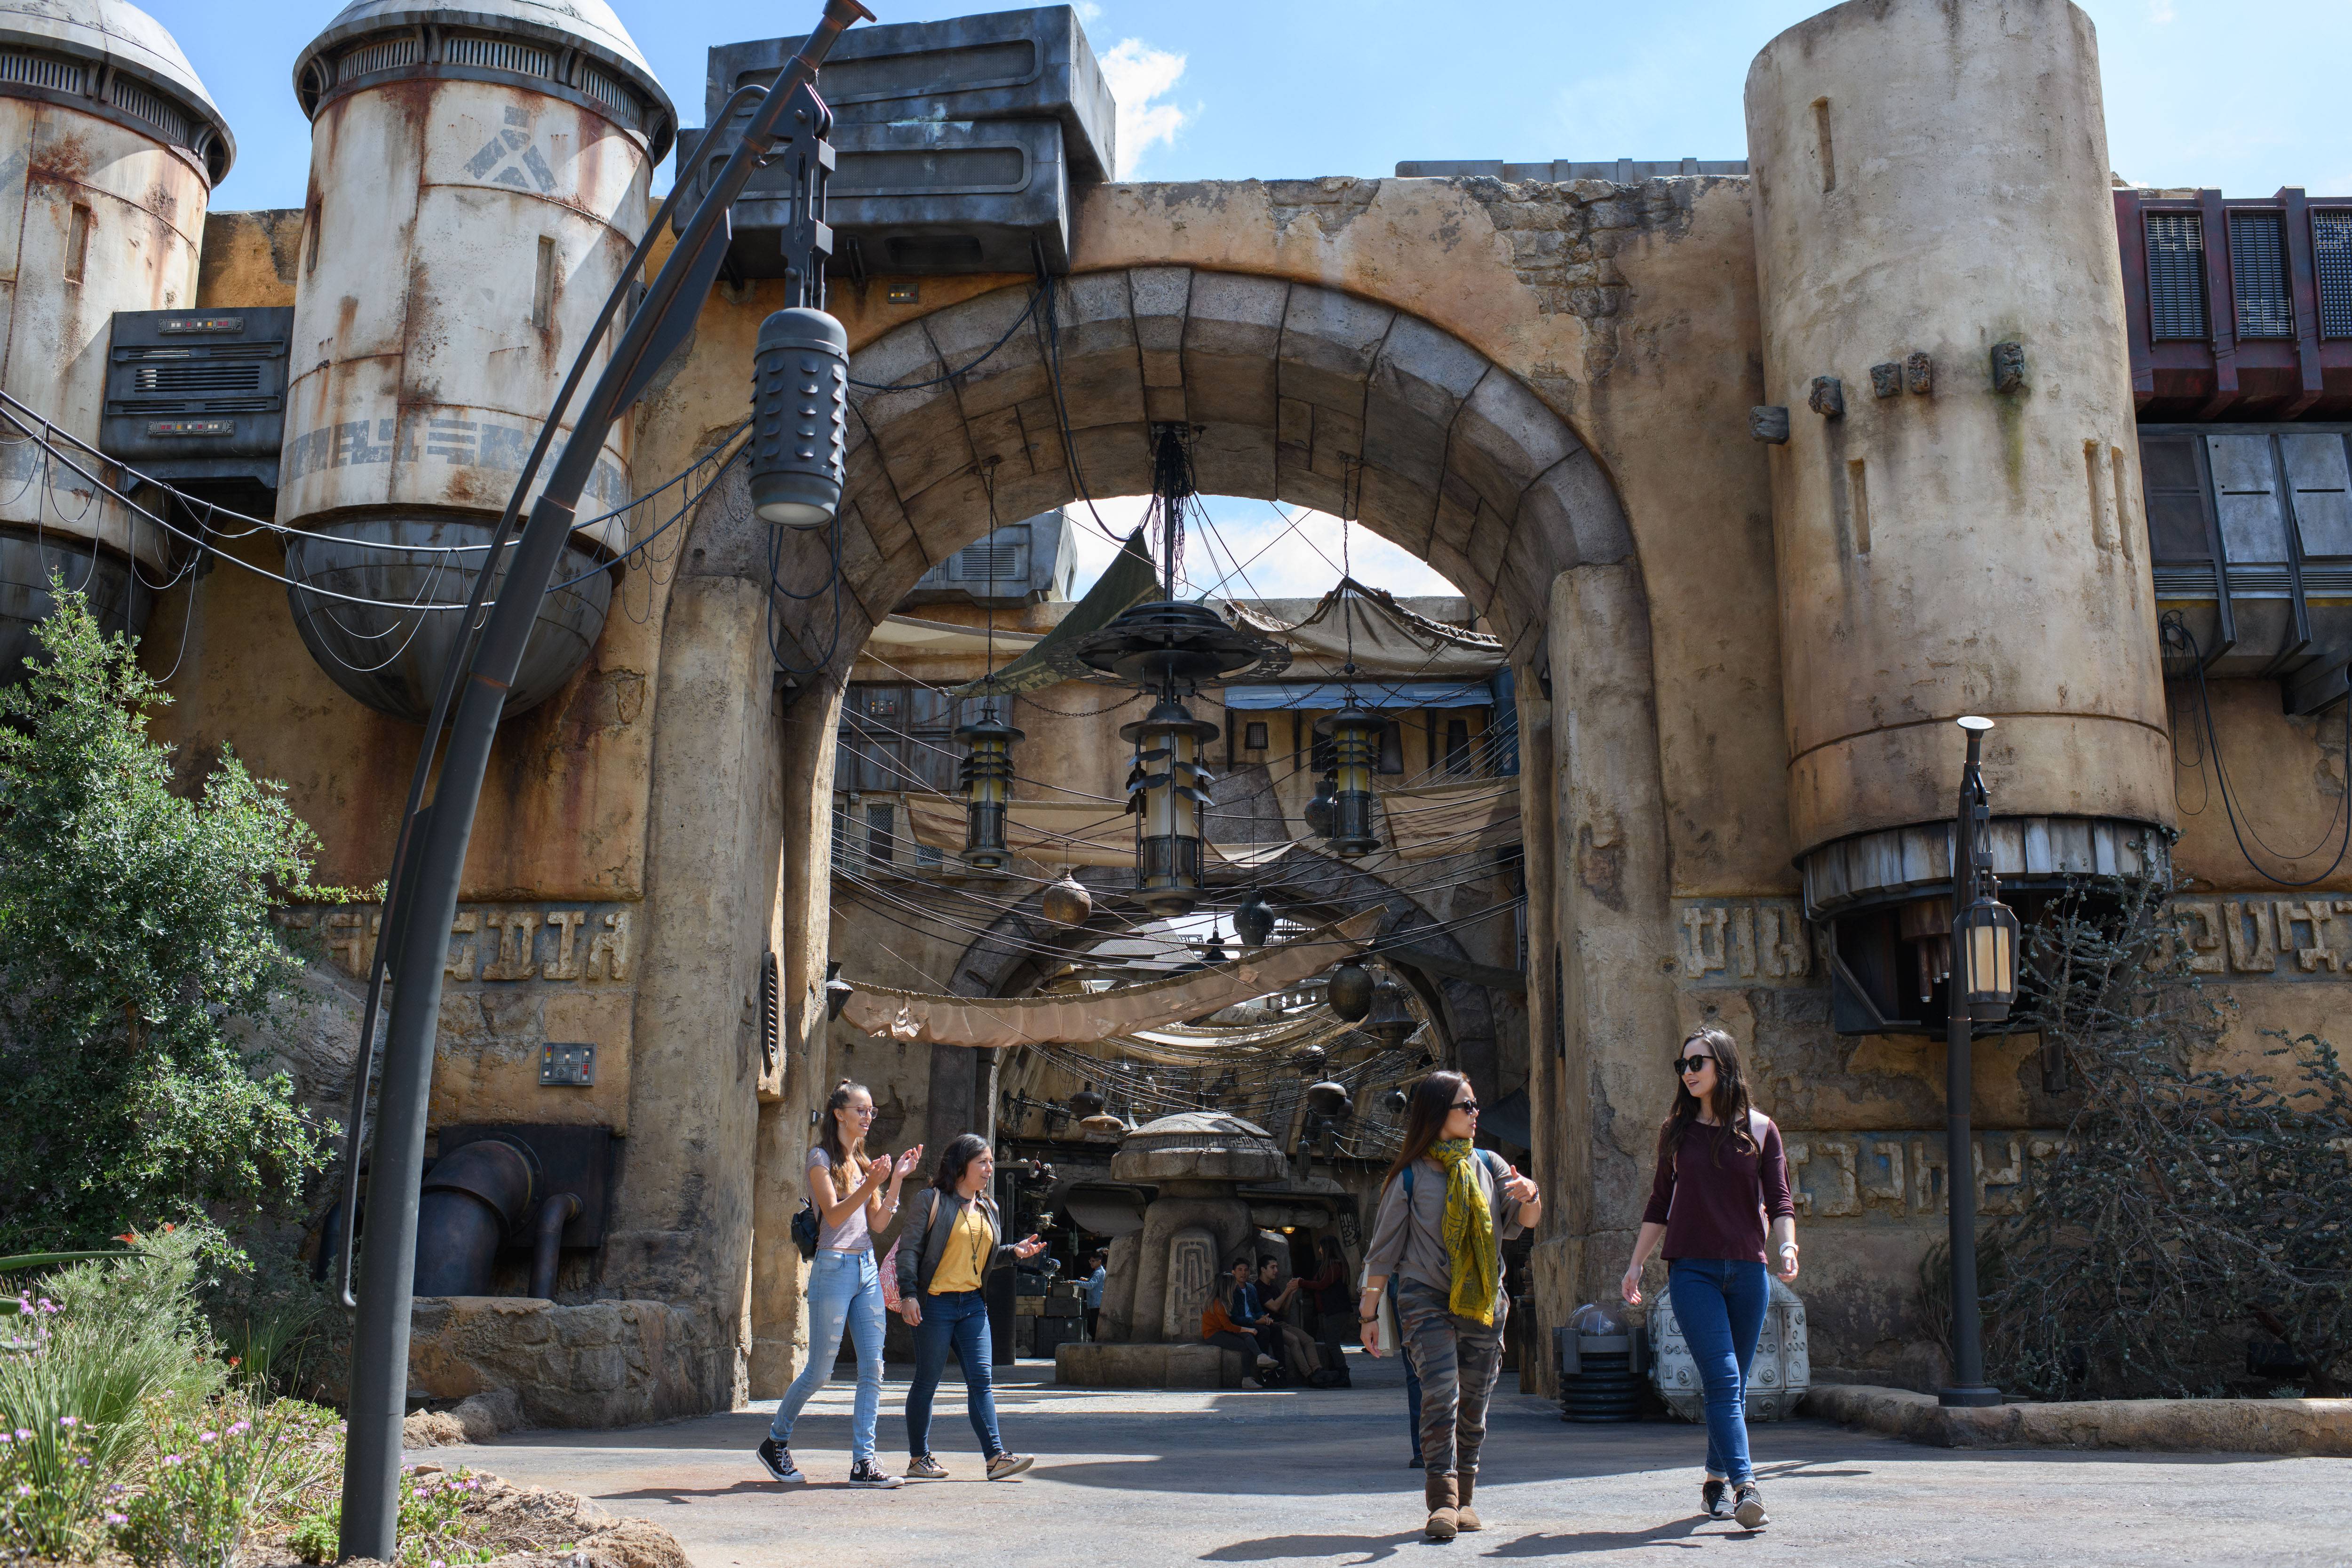 Star Wars Galaxy's Edge dedication ceremony to be broadcast live from Disney's Hollywood Studios